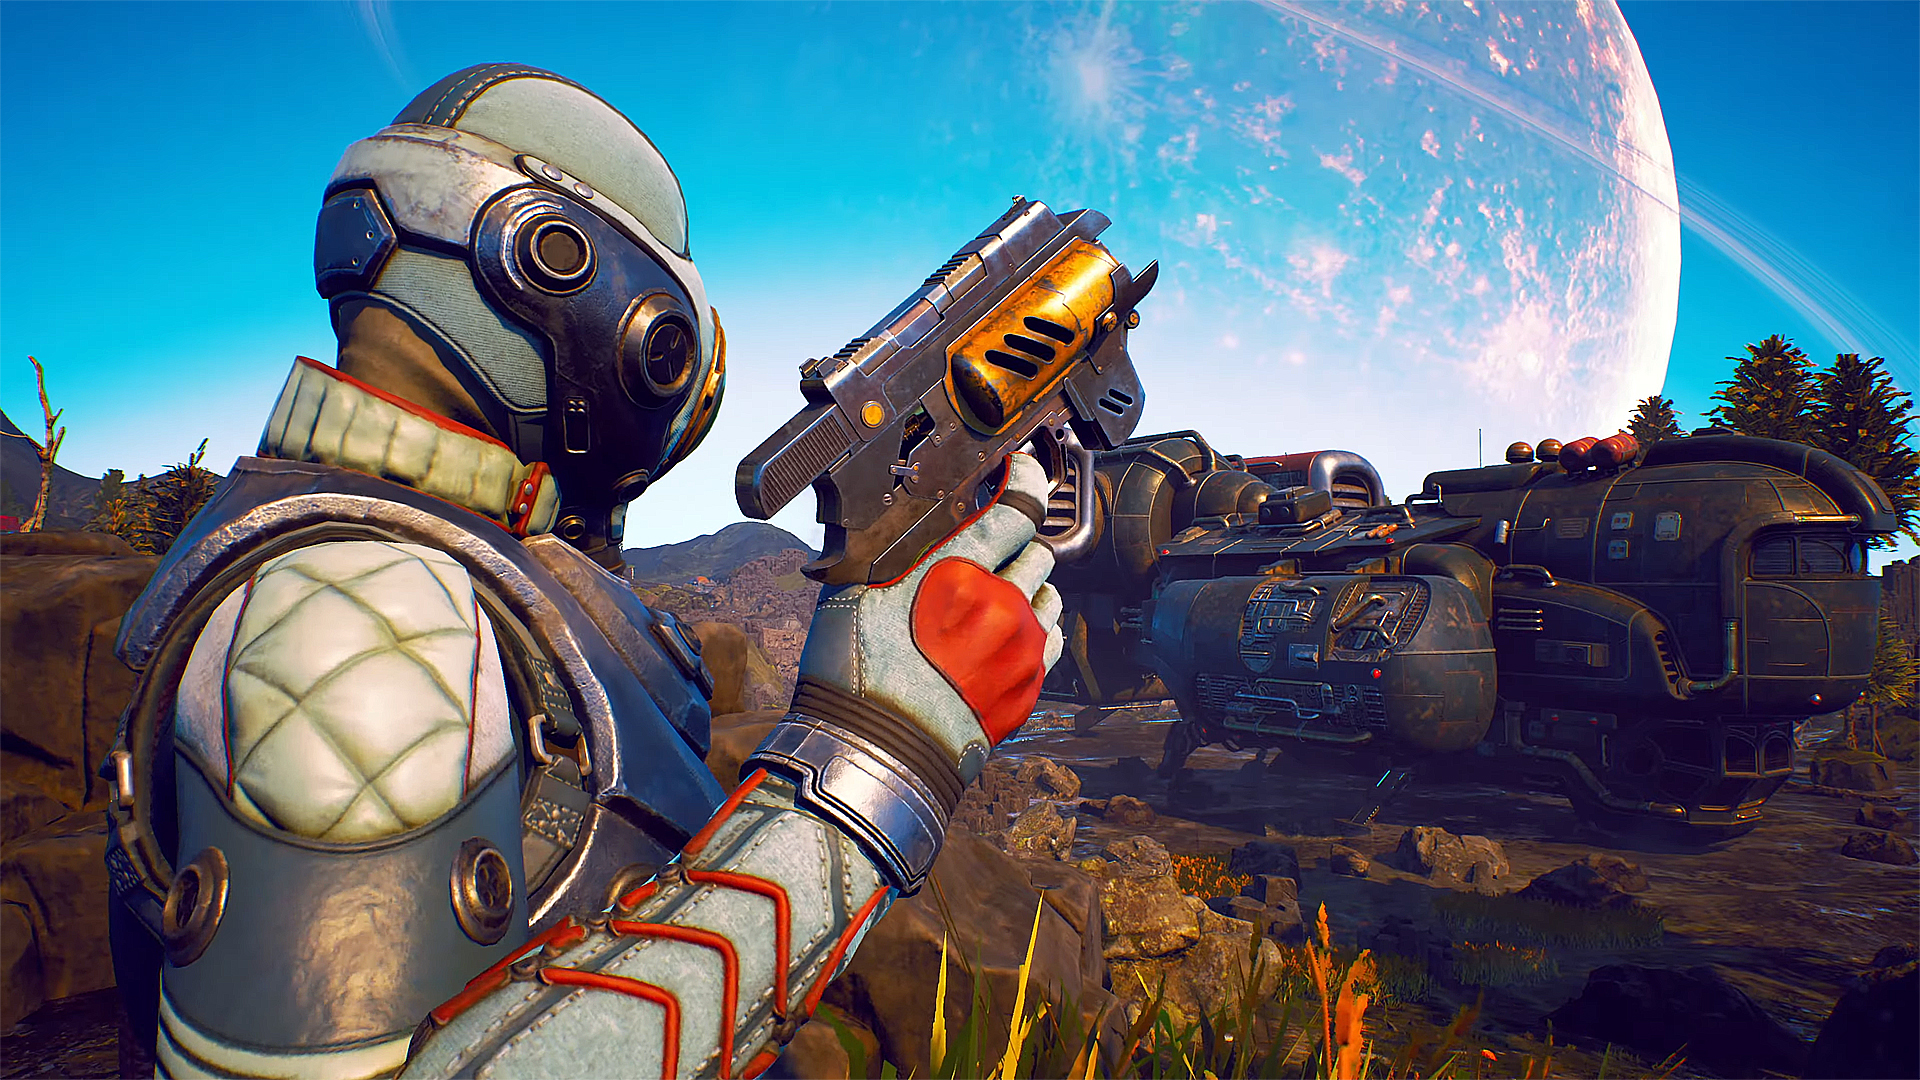 The Outer Worlds Spacer's Choice Edition - Crucial Details! 